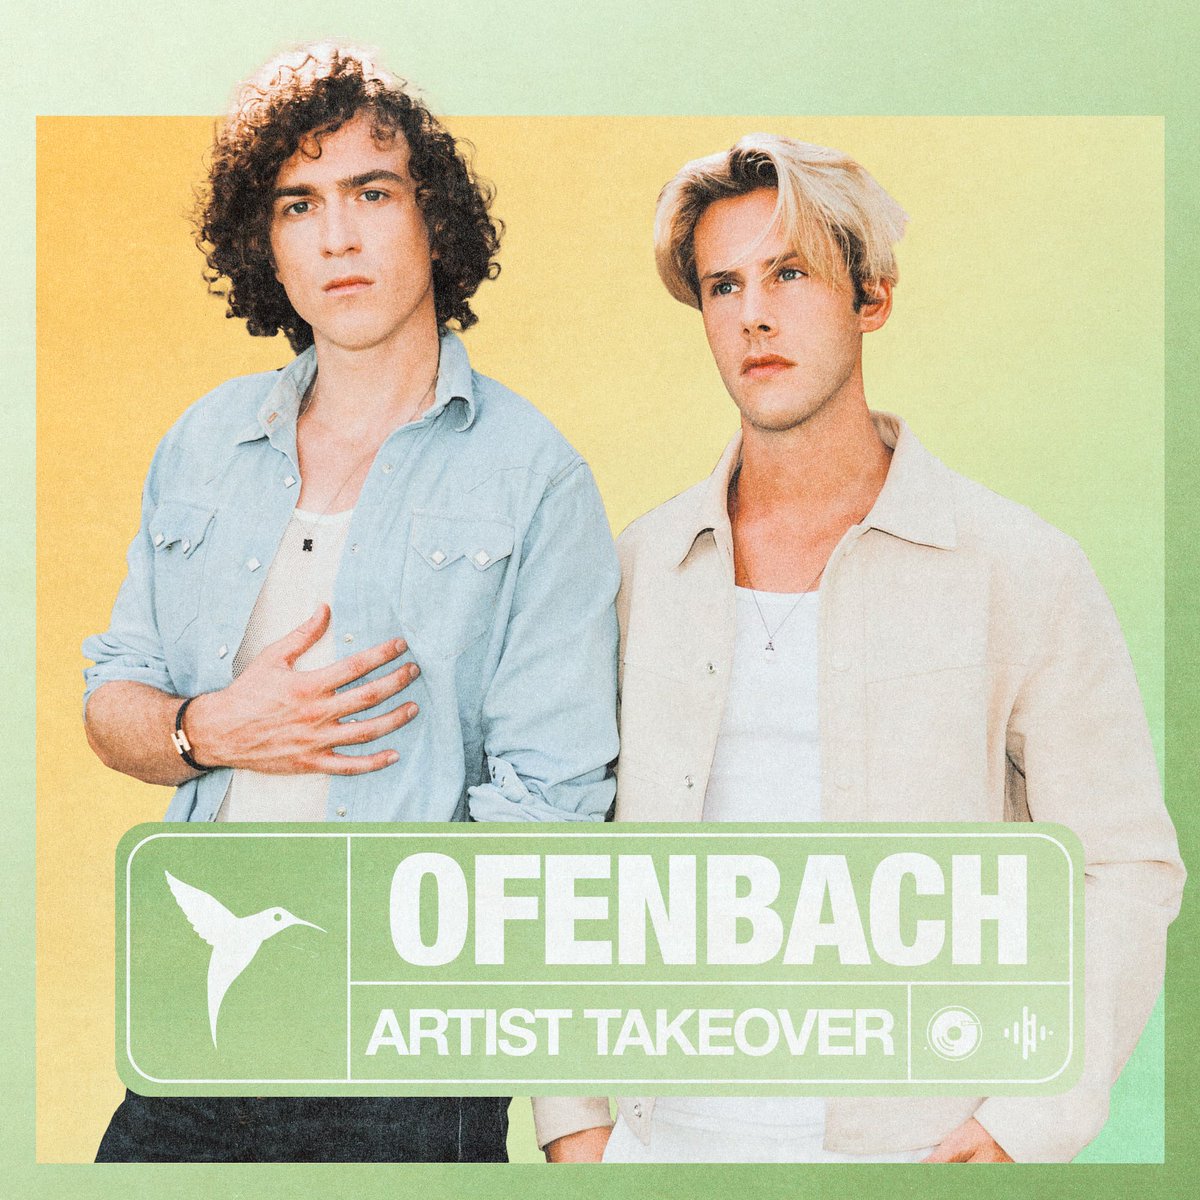 Time to dance! ⚡️ Ofenbach have taken over our Ushuaïa Ibiza official playlist with a curated selection of tracks just for YOU 🔥 Go ahead and listen now! Tap here: lnk.bio/ushuaiaibiza #Ofenbach #Spotify #UshuaiaIbiza #Ibiza